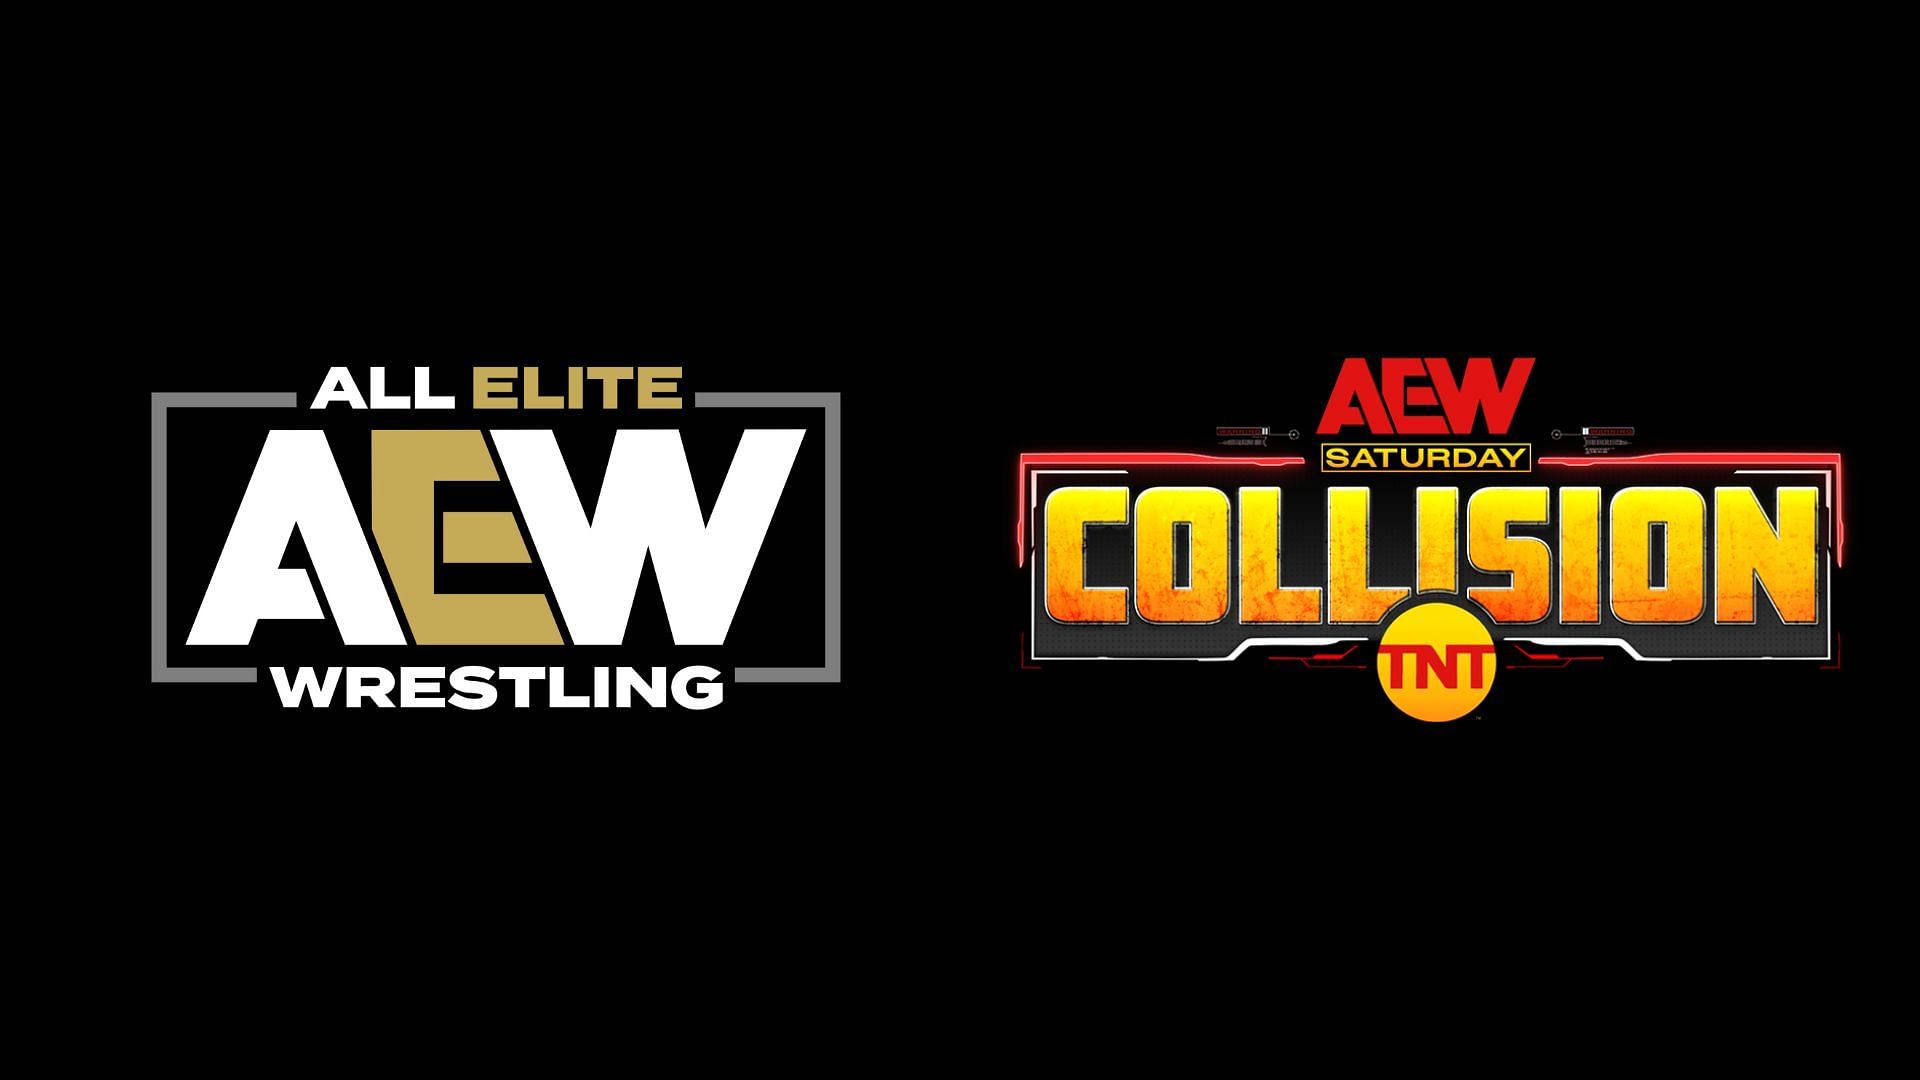 Collision is the weekly Saturday show of All Elite Wrestling